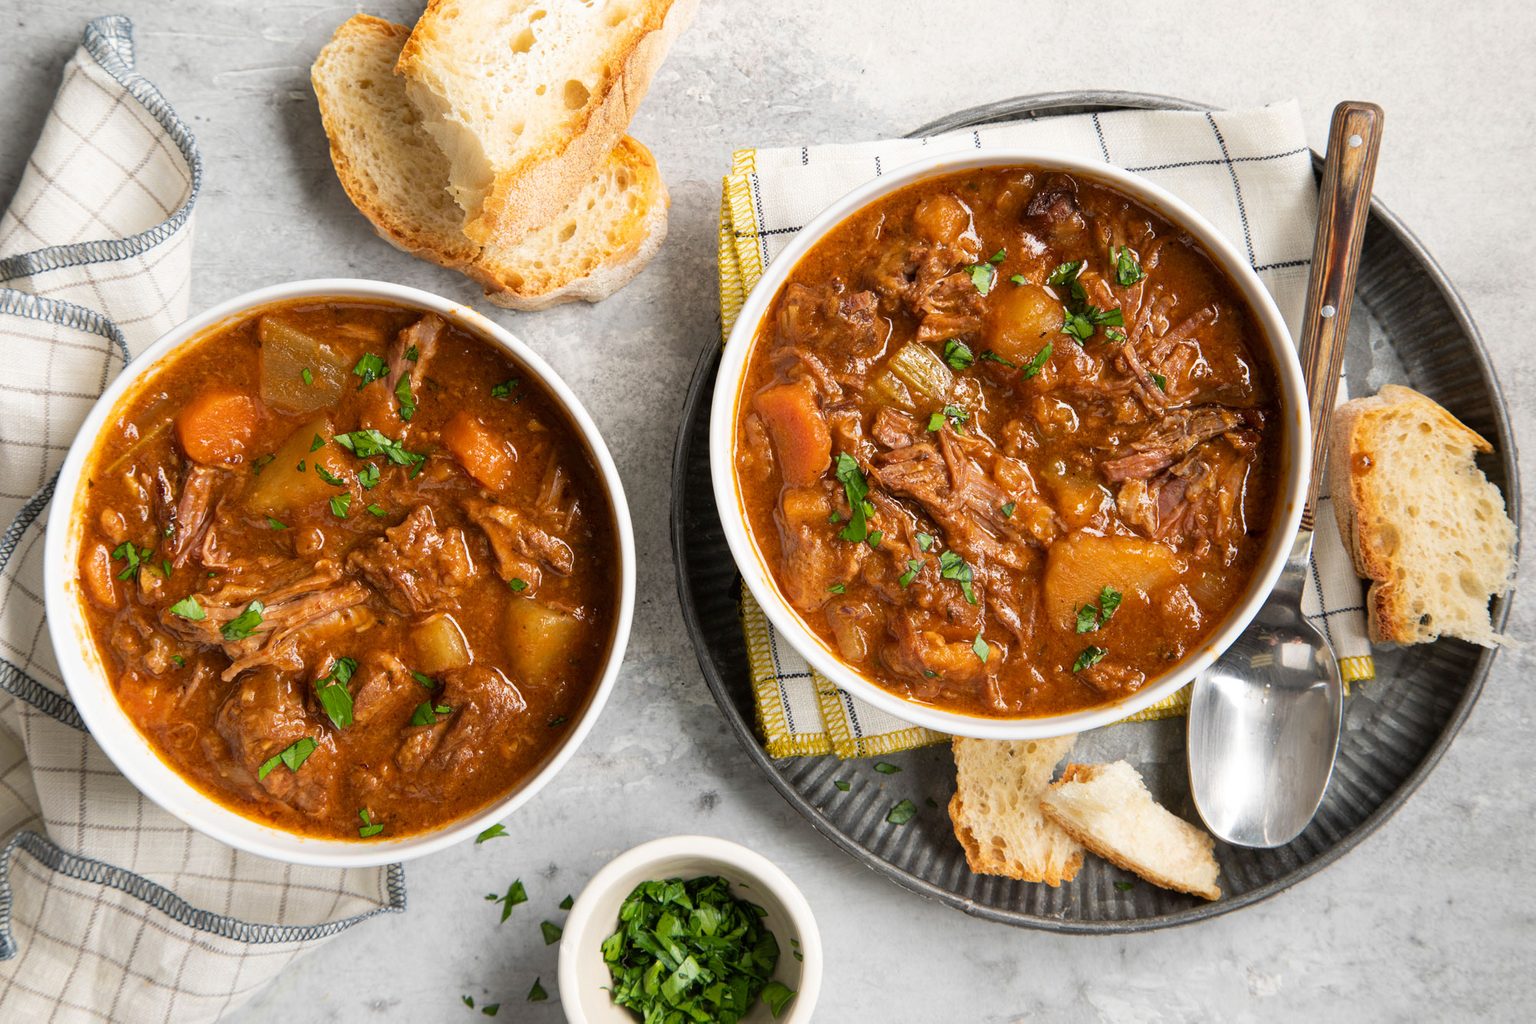 Make Slow-Cooker Guinness Beef Stew with This Easy Recipe